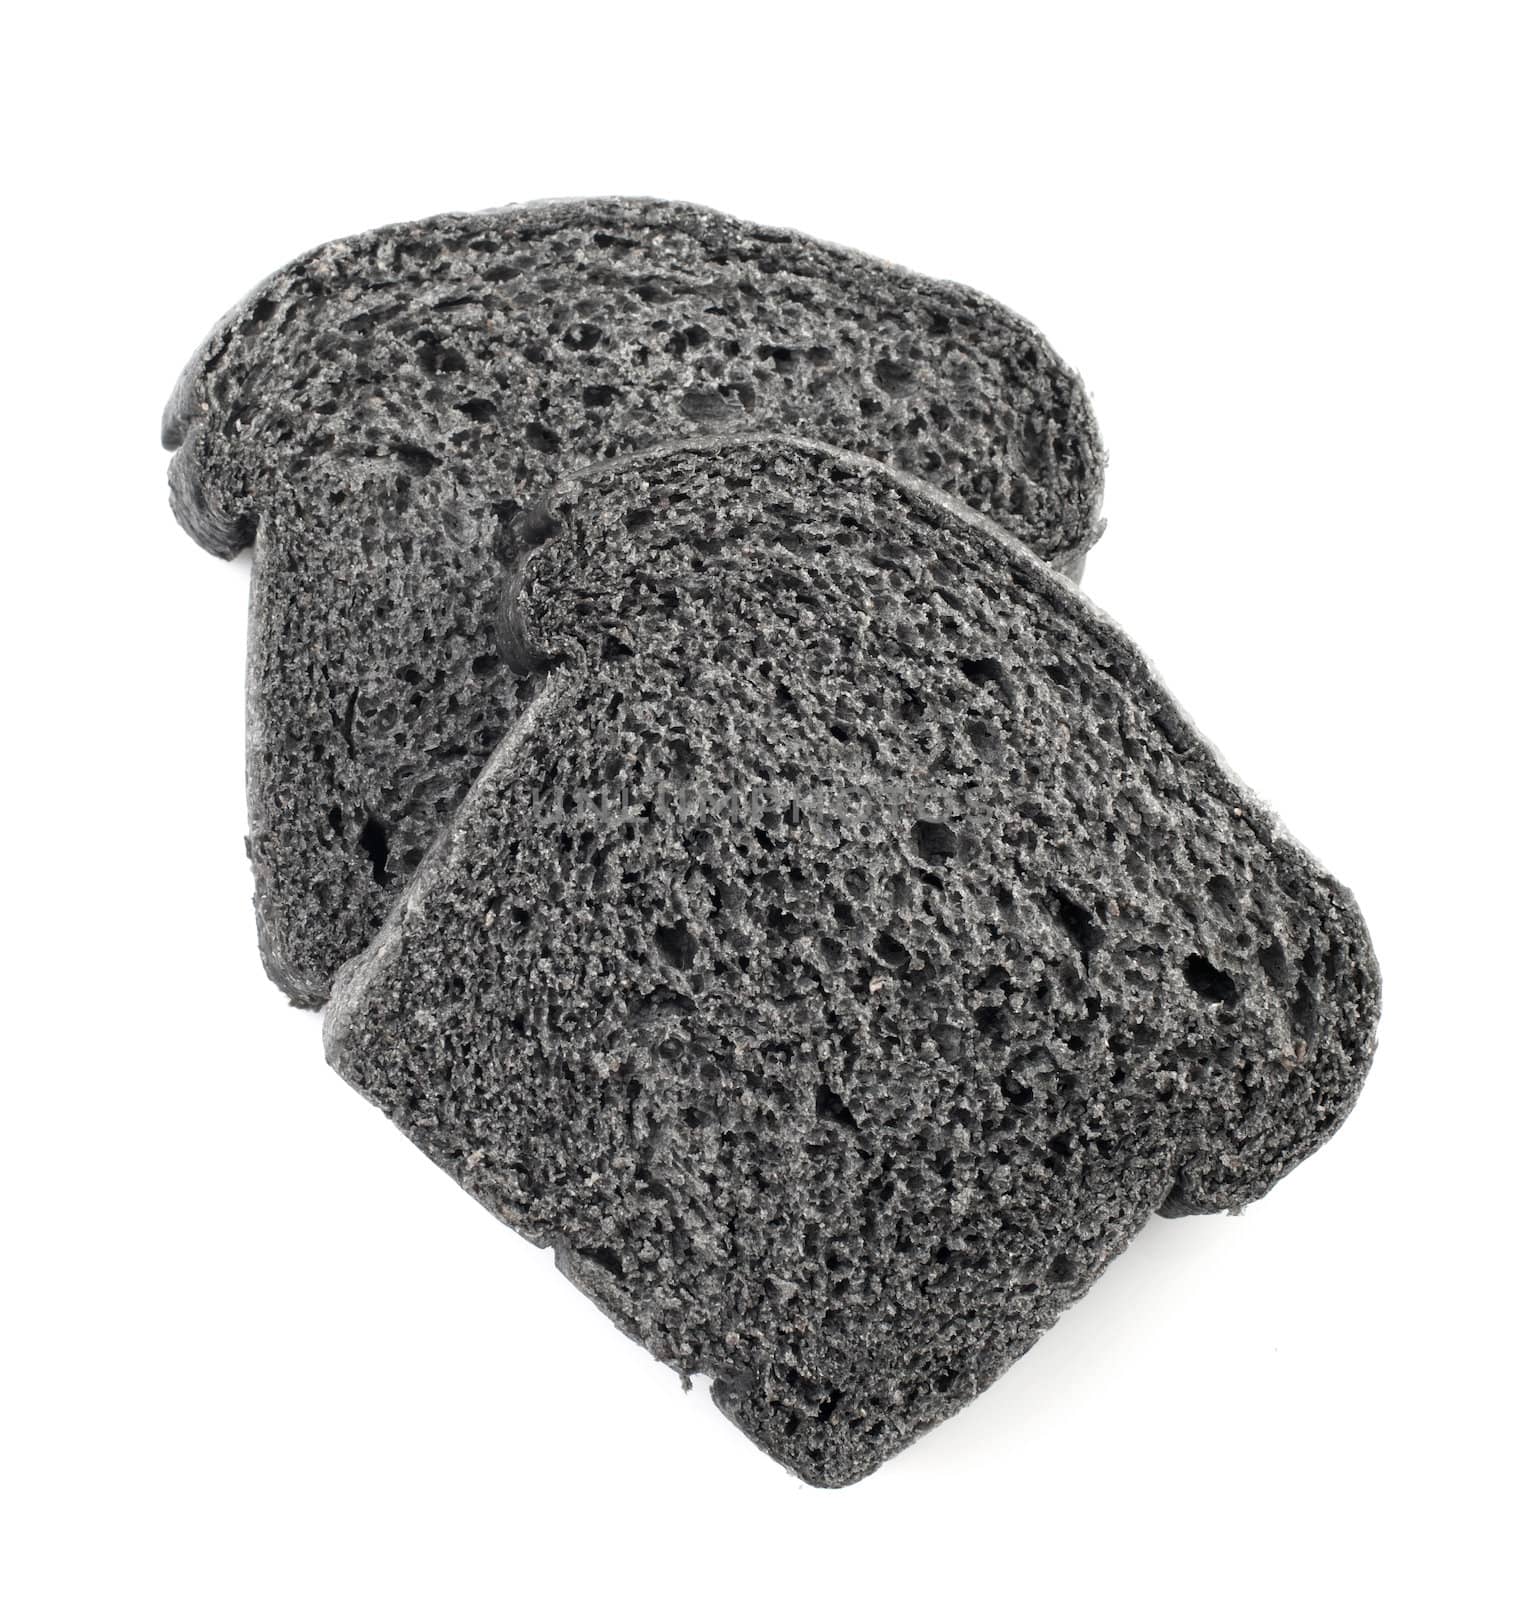 Slices of organic black charcoal bread isolated on white background